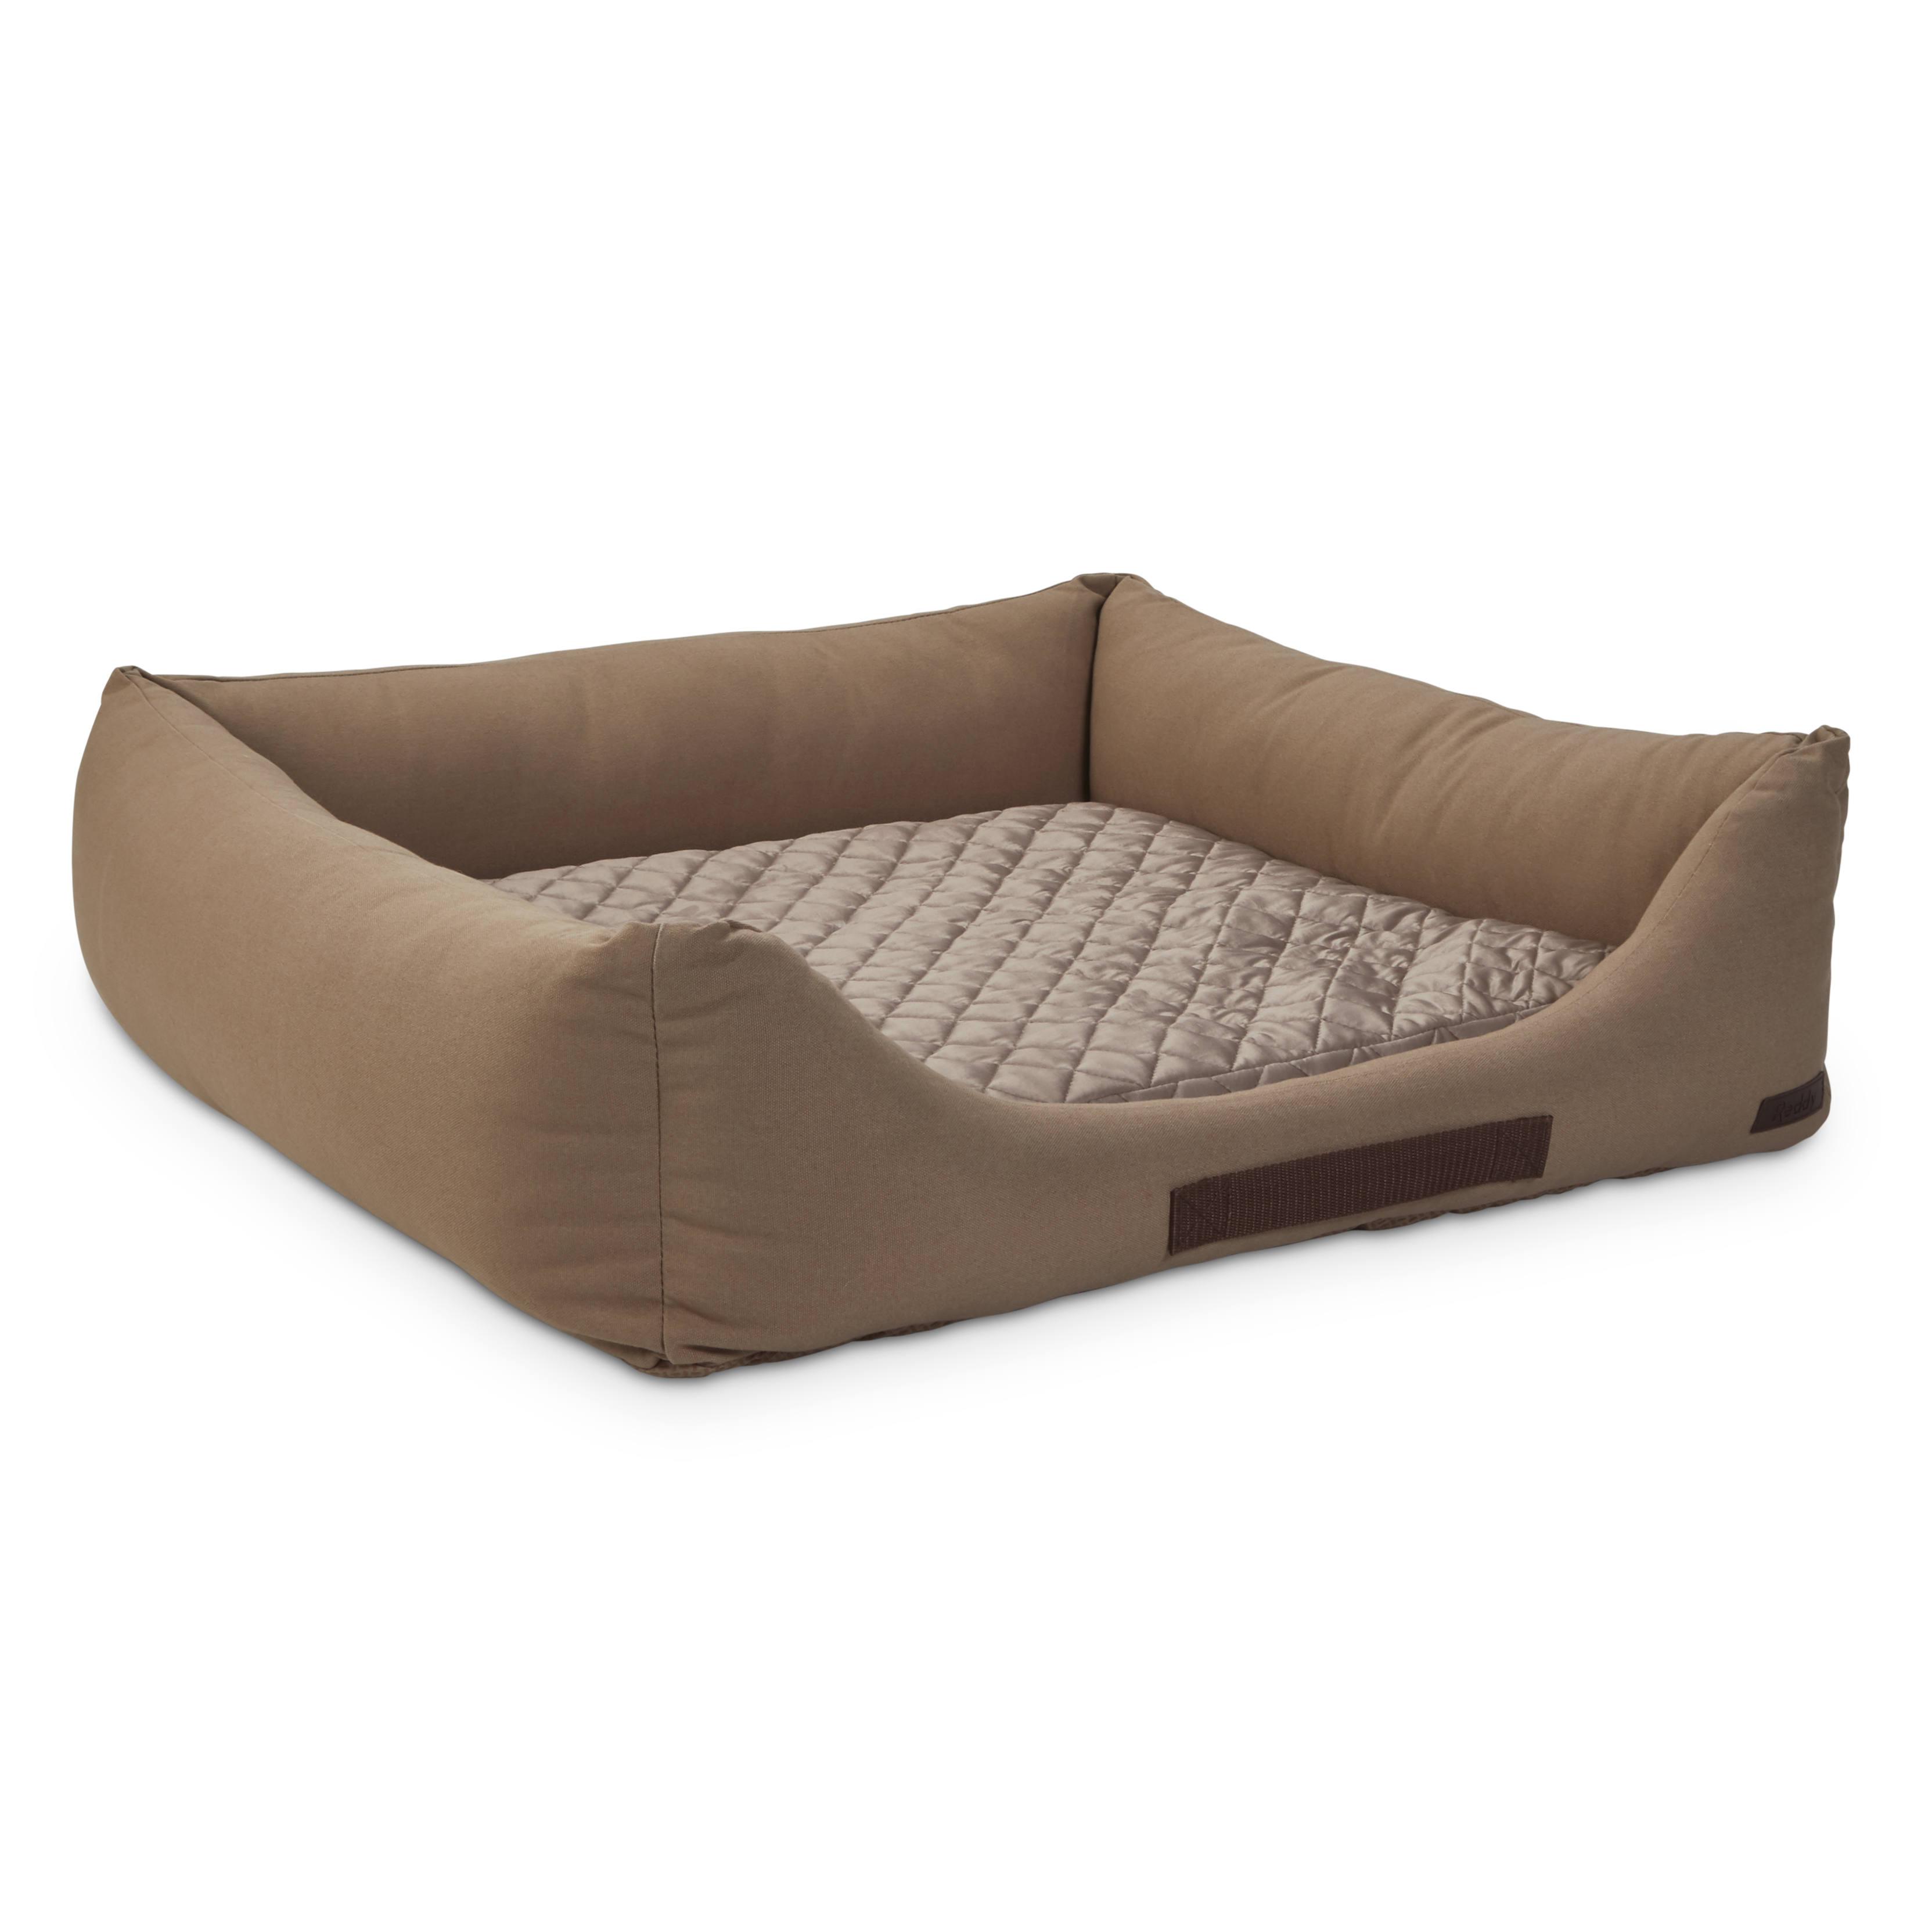 Reddy Canvas Cozy & Cool-Touch Dog Bed, 28 L X 28 W, Grey